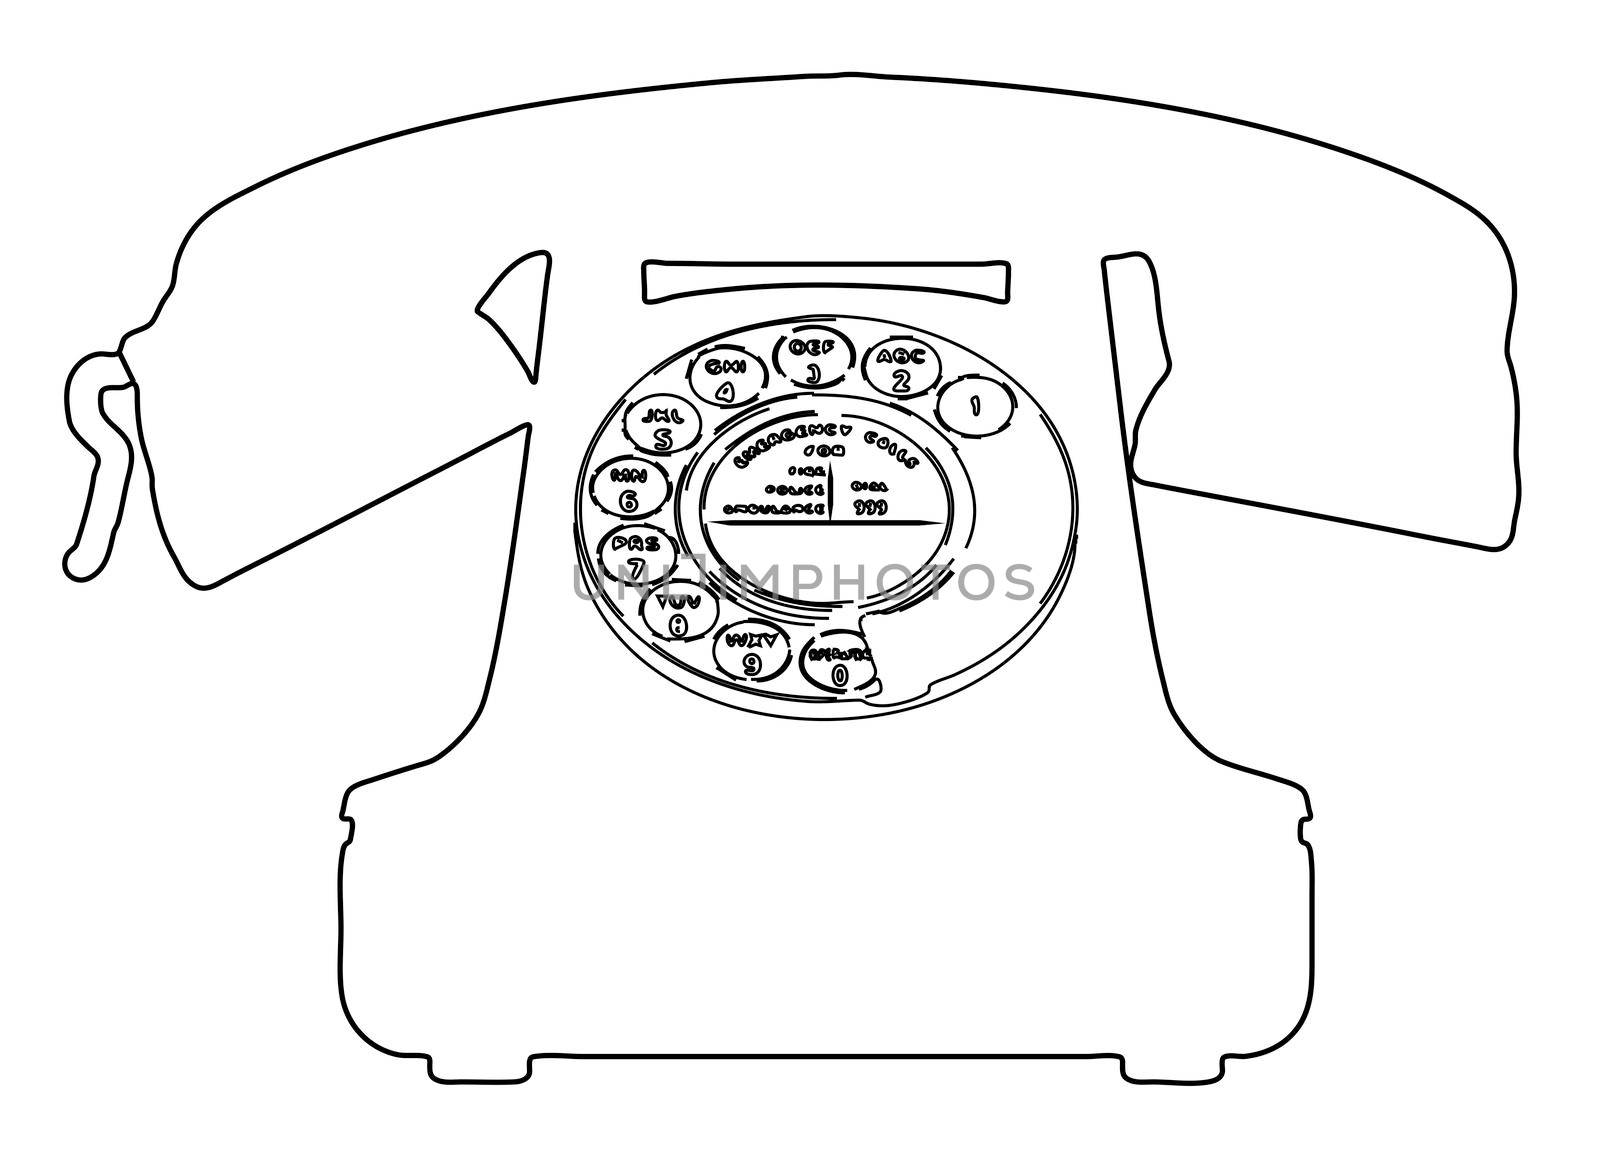 A large outline of an old fashioned typical hot line telephone